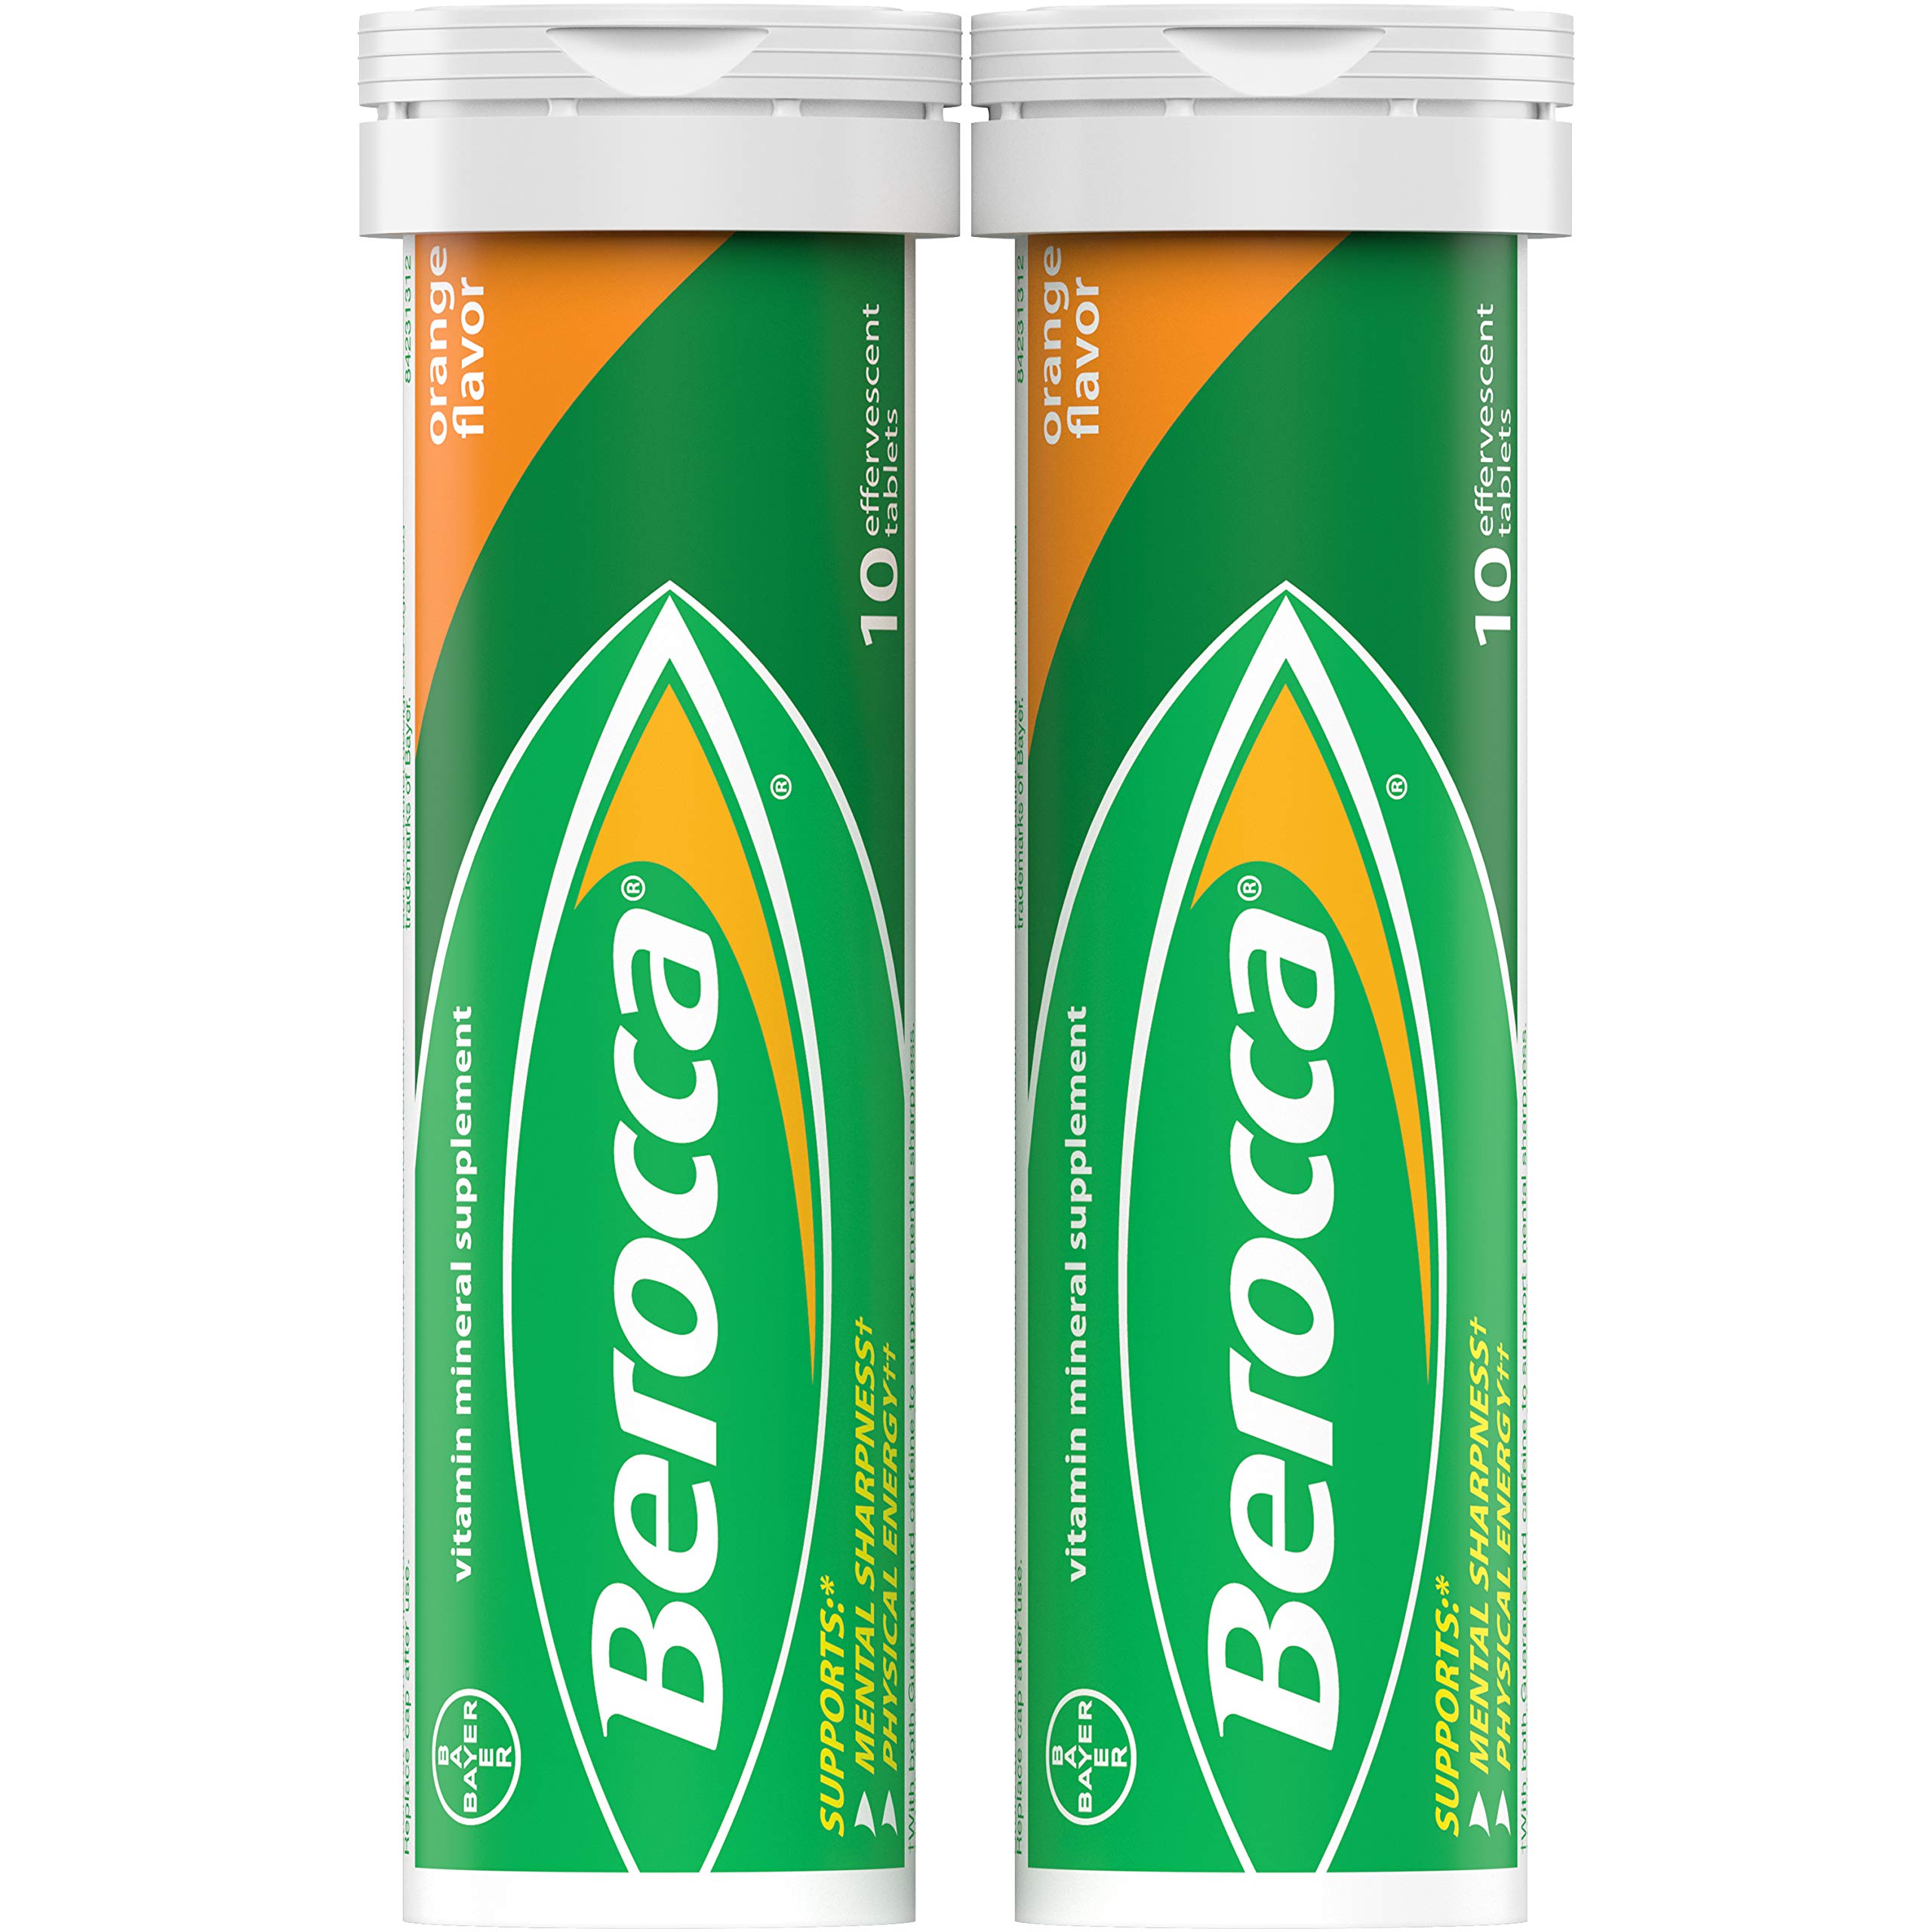 Berocca Energy Vitamin Supplement for Mental Sharpness and Physical Energy Support, Orange Flavor, Effervescent Tablets, 20 Count